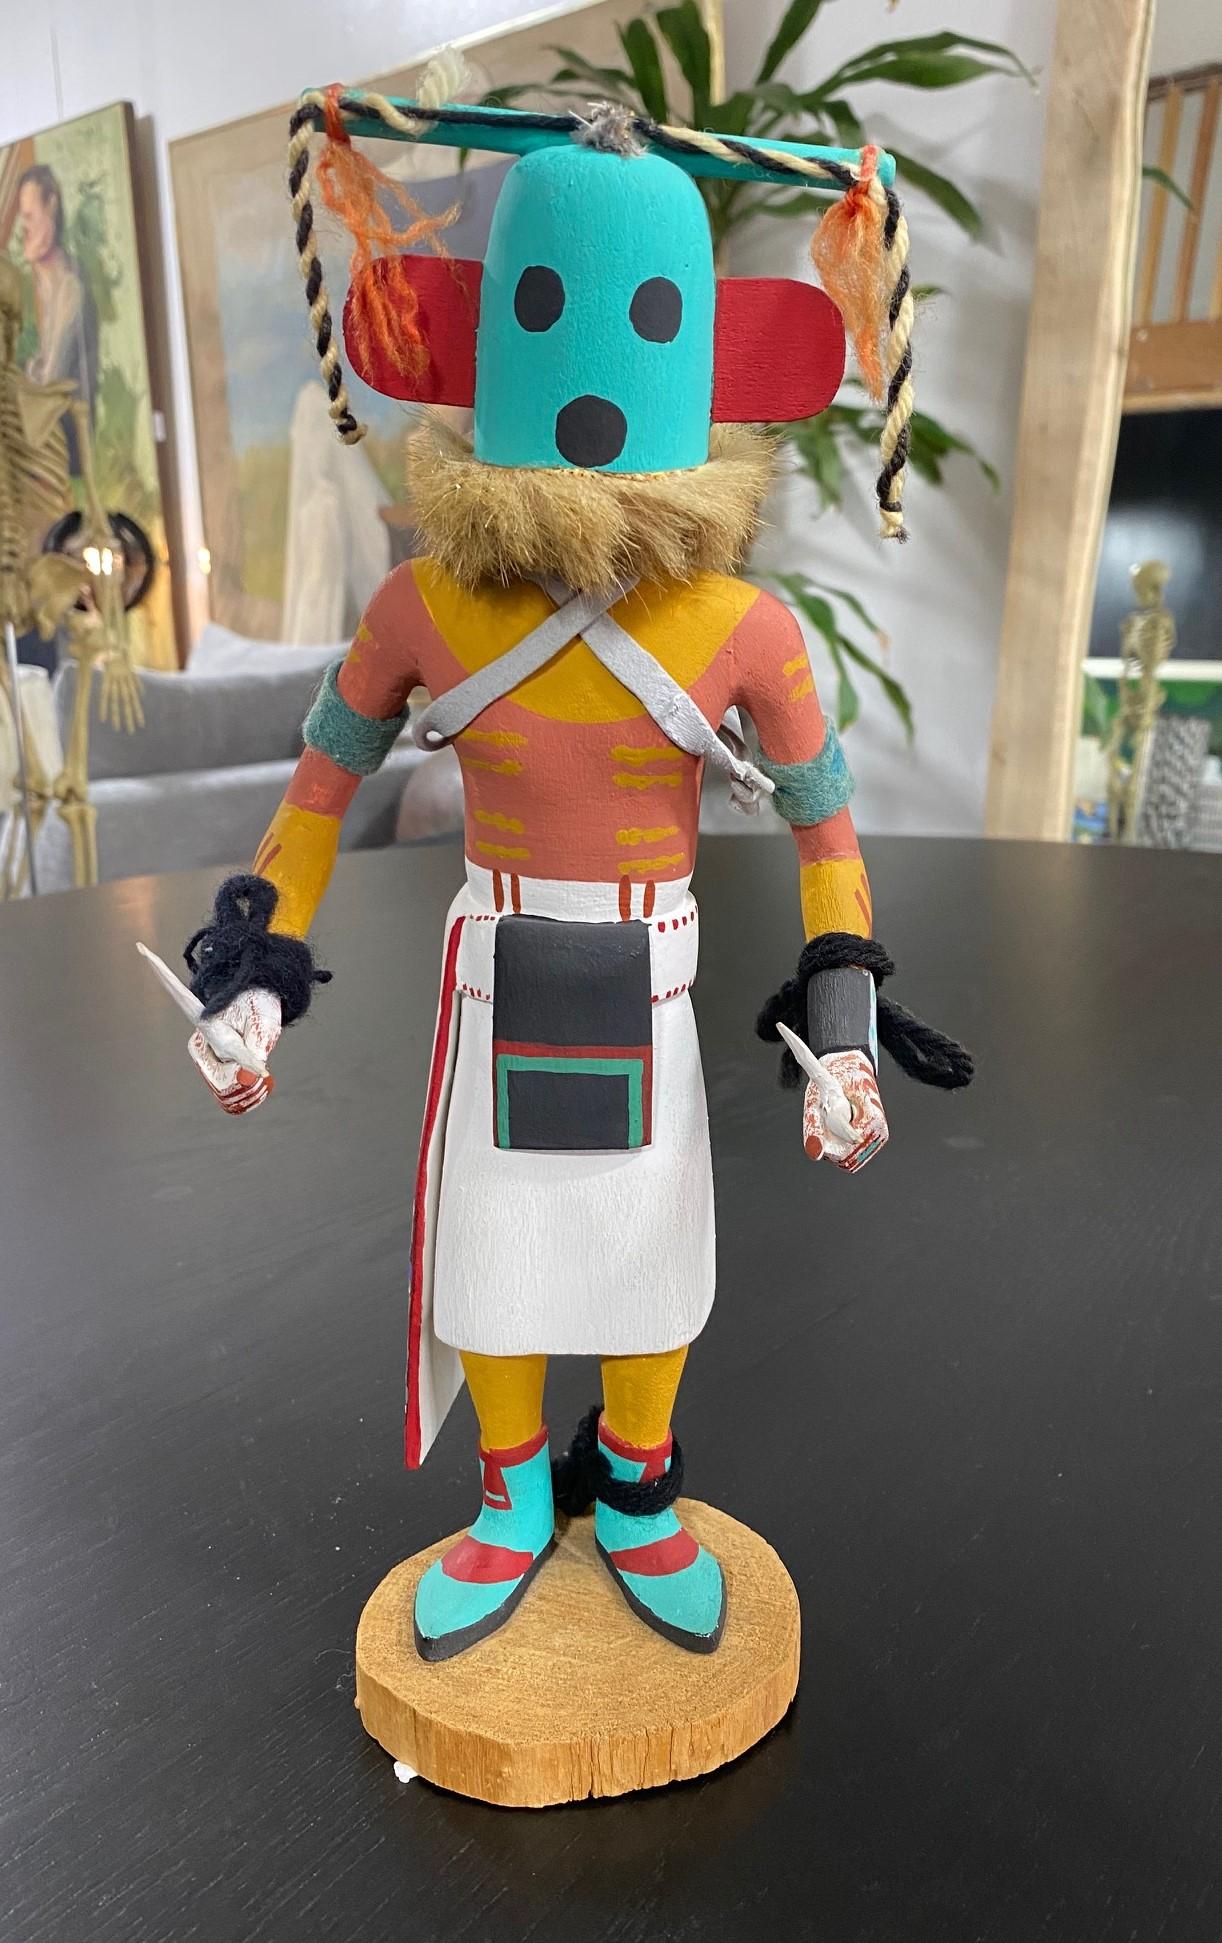 A wonderfully hand-painted/detailed and decorated Native American Hopi Kachina doll. Nice Size. A striking piece overall. 

From a collection of Native American objects and artifacts.

Would be a great addition to any Native American Kachina or